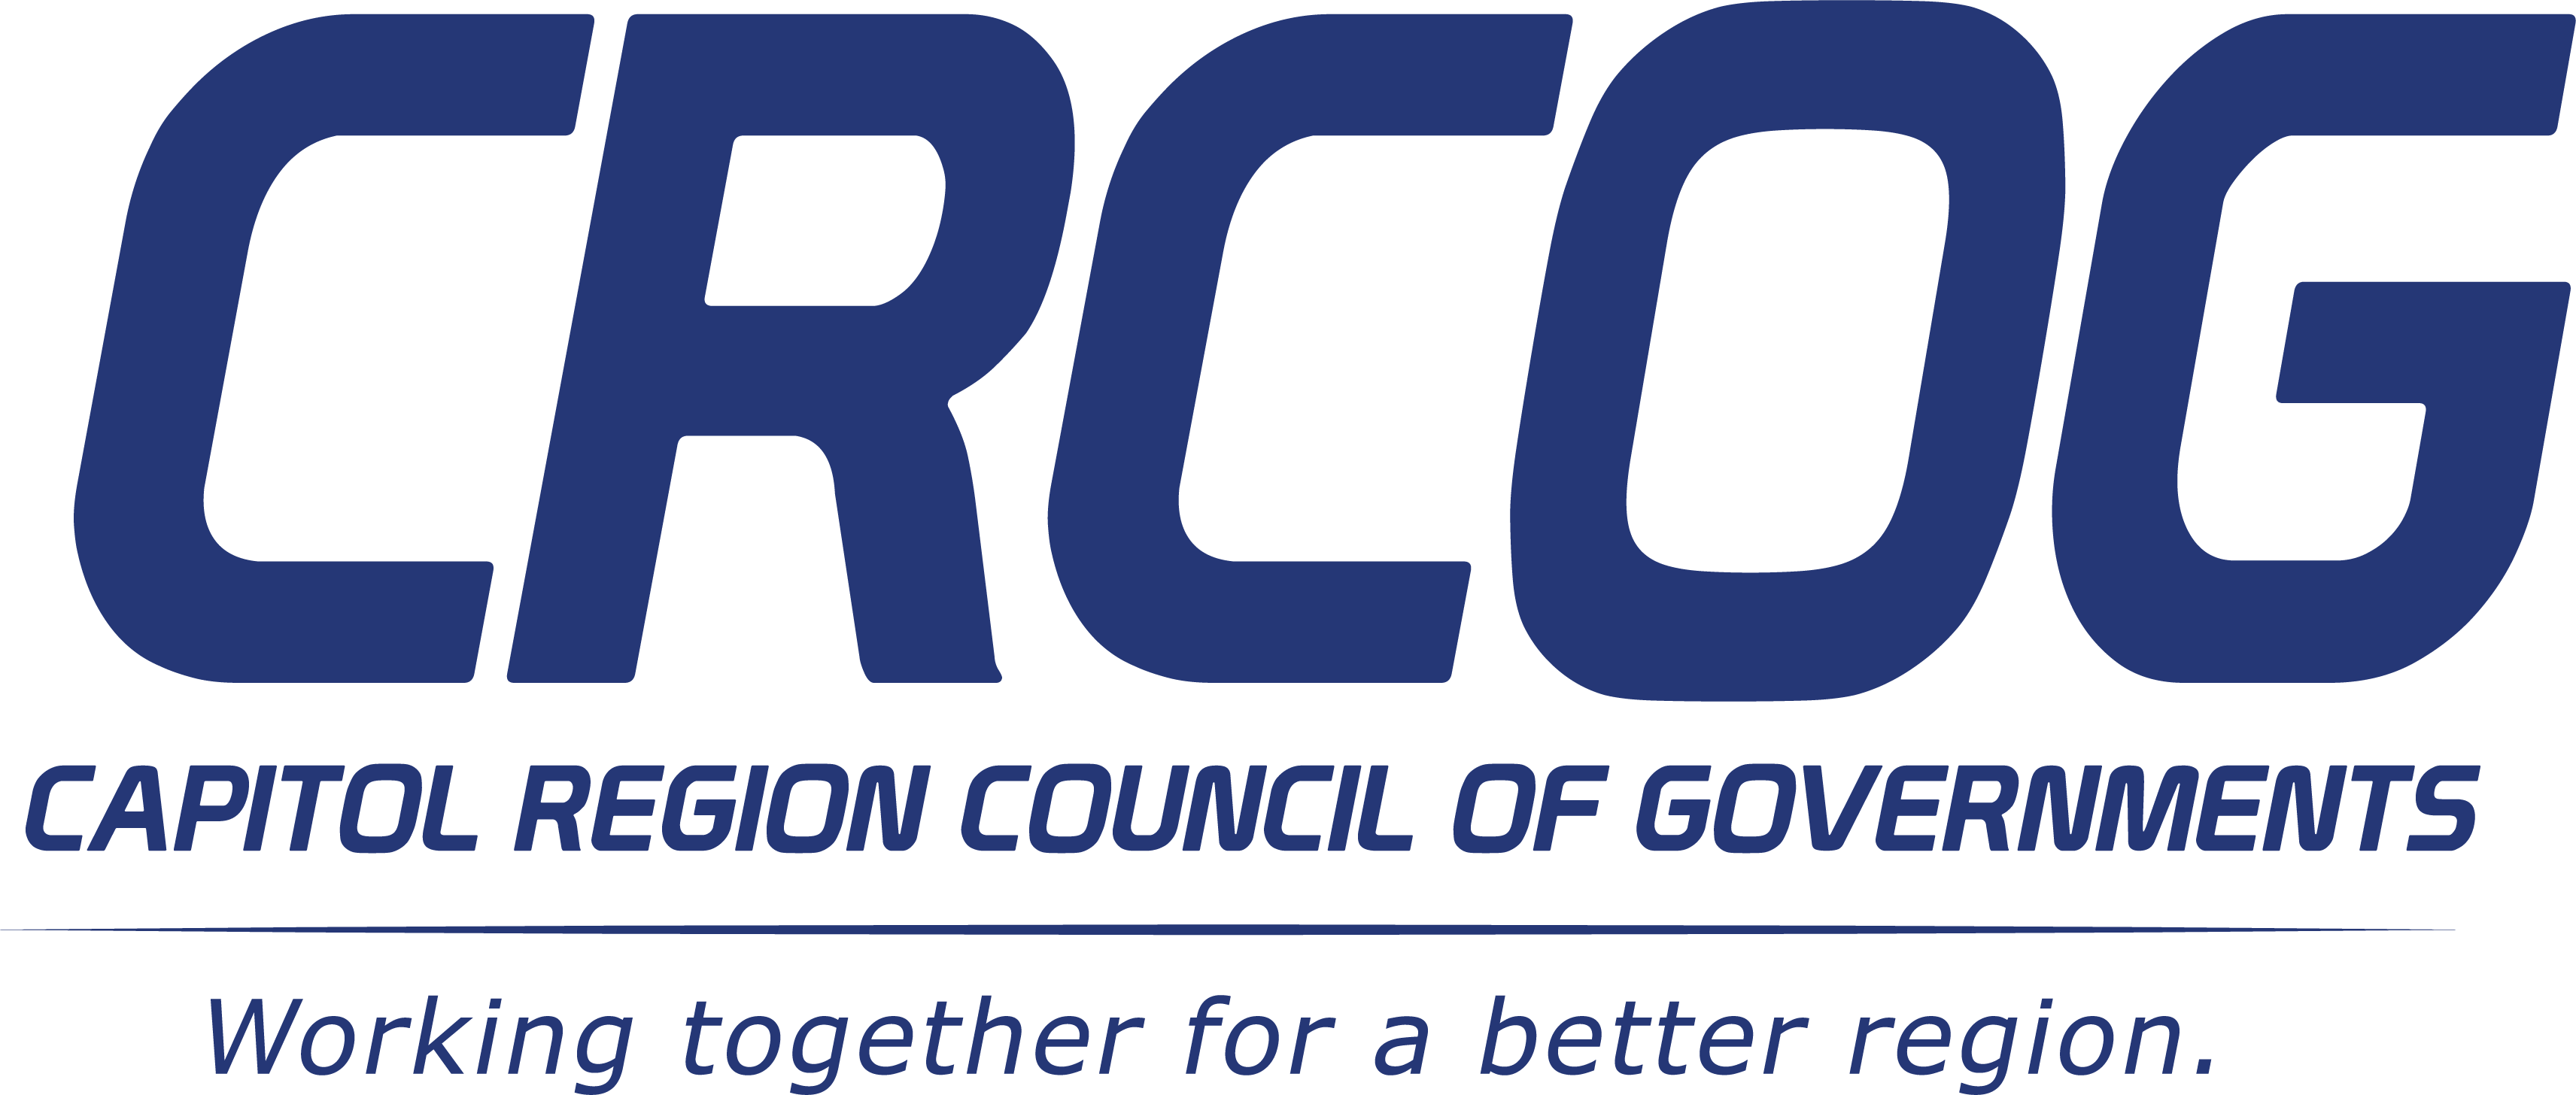 CRCOG - Capitol Region Council of Governments - Working together for a better region